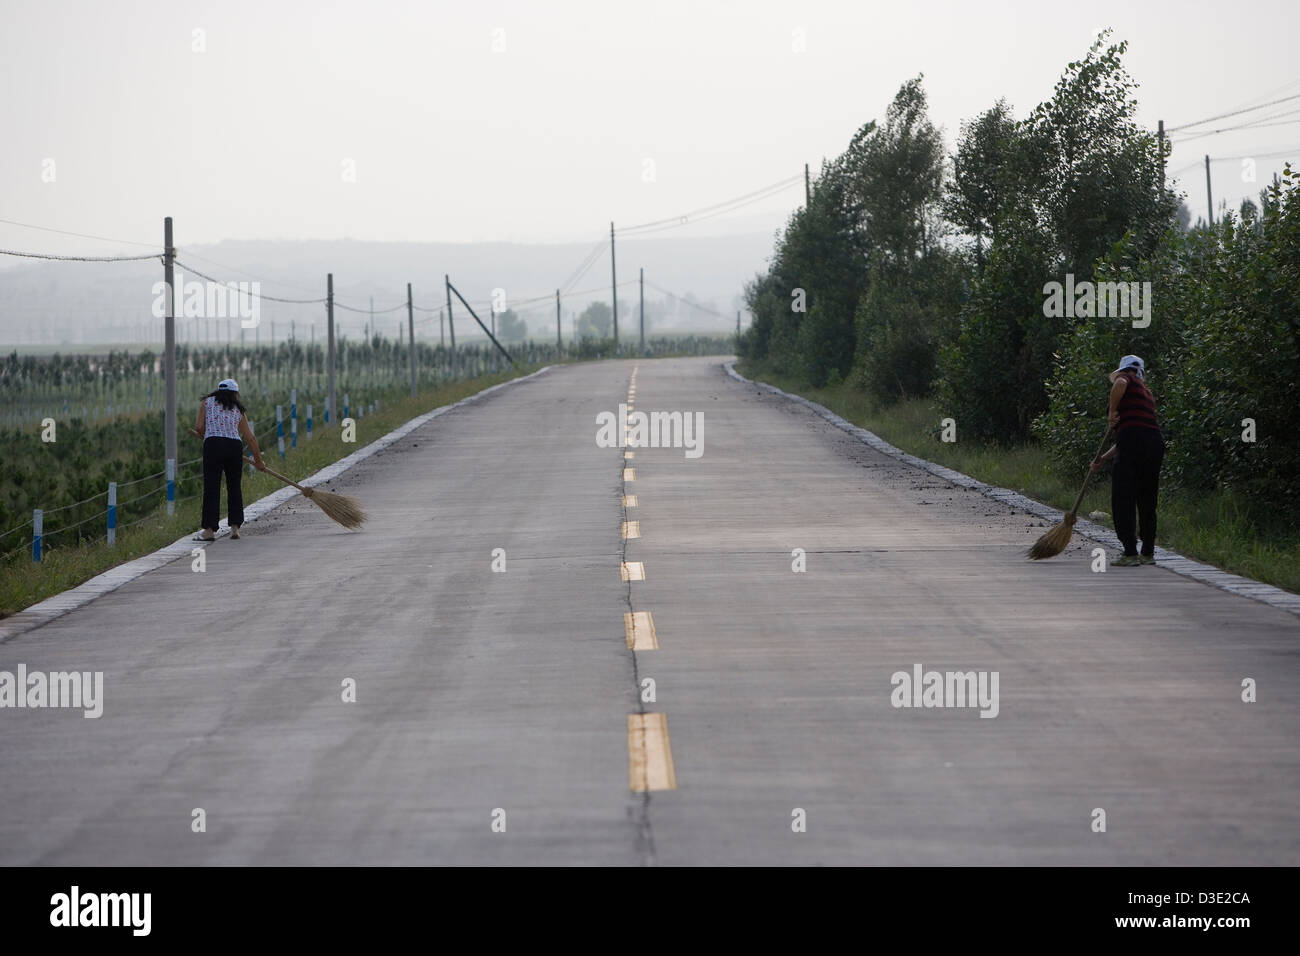 SHANXI PROVINCE, CHINA - AUGUST 2007:  Villagers sweep up coal dropped by passing coal trucks. Stock Photo